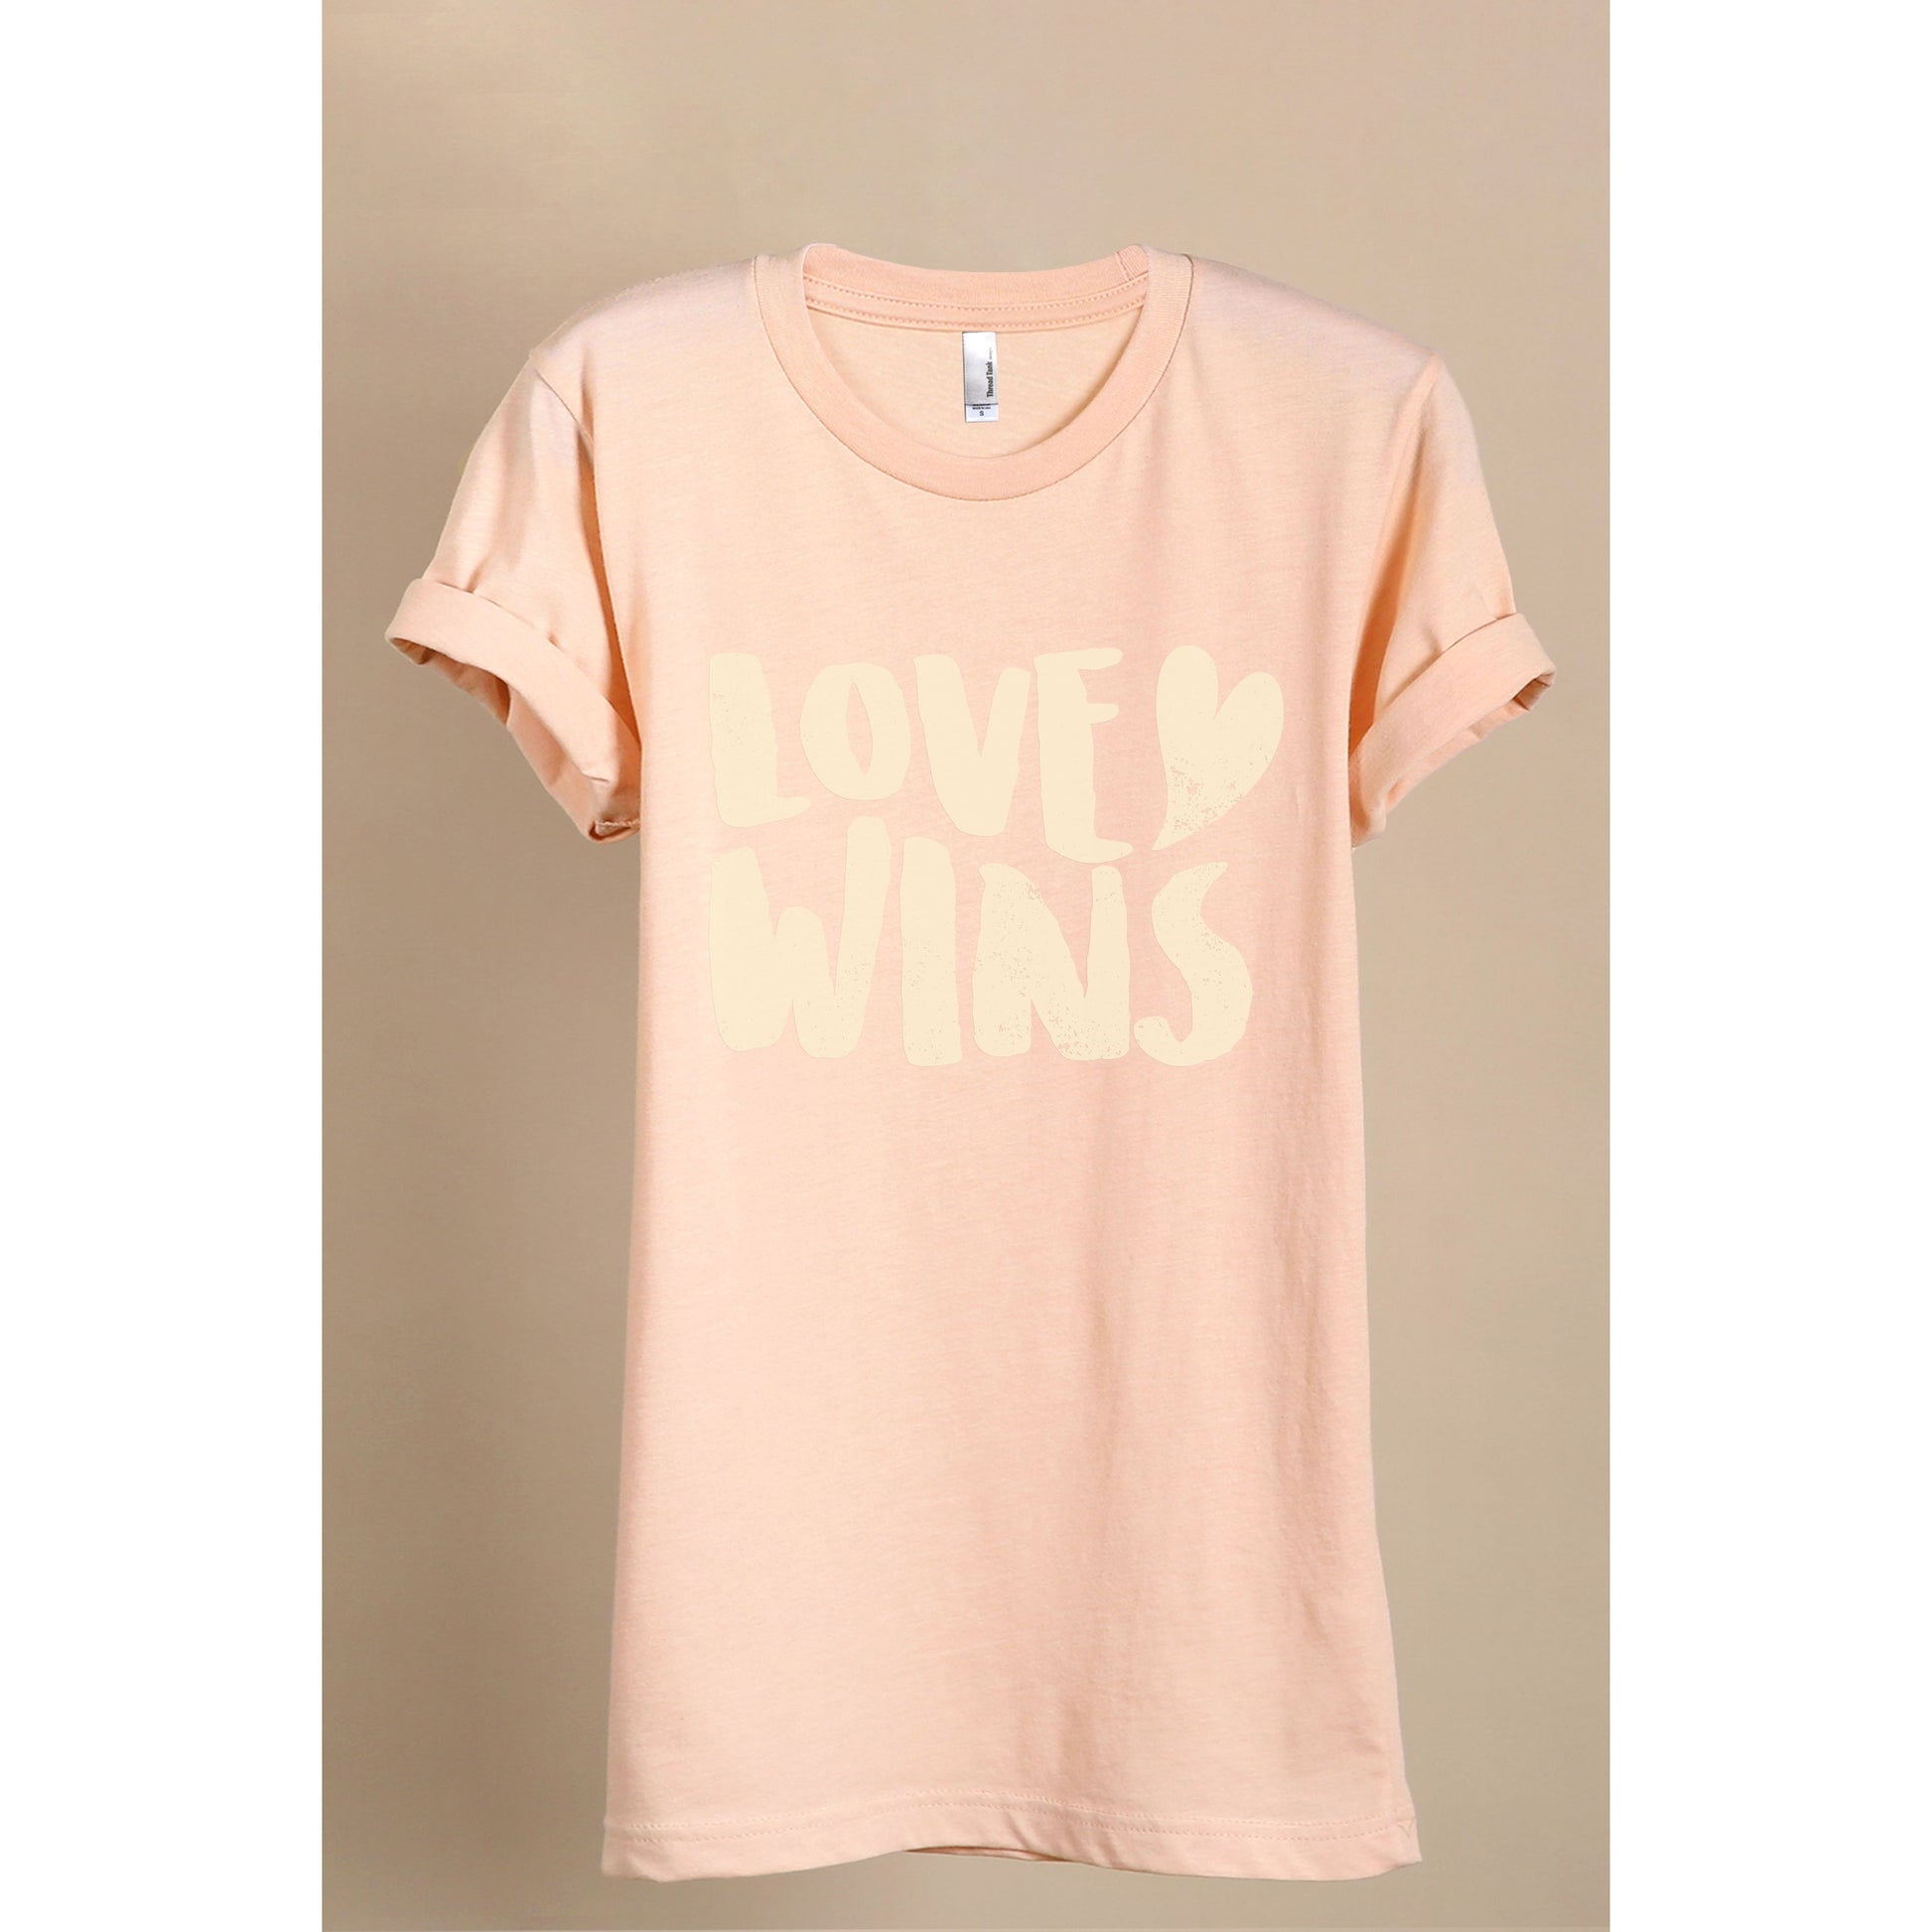 Love Wins - thread tank | Stories you can wear.